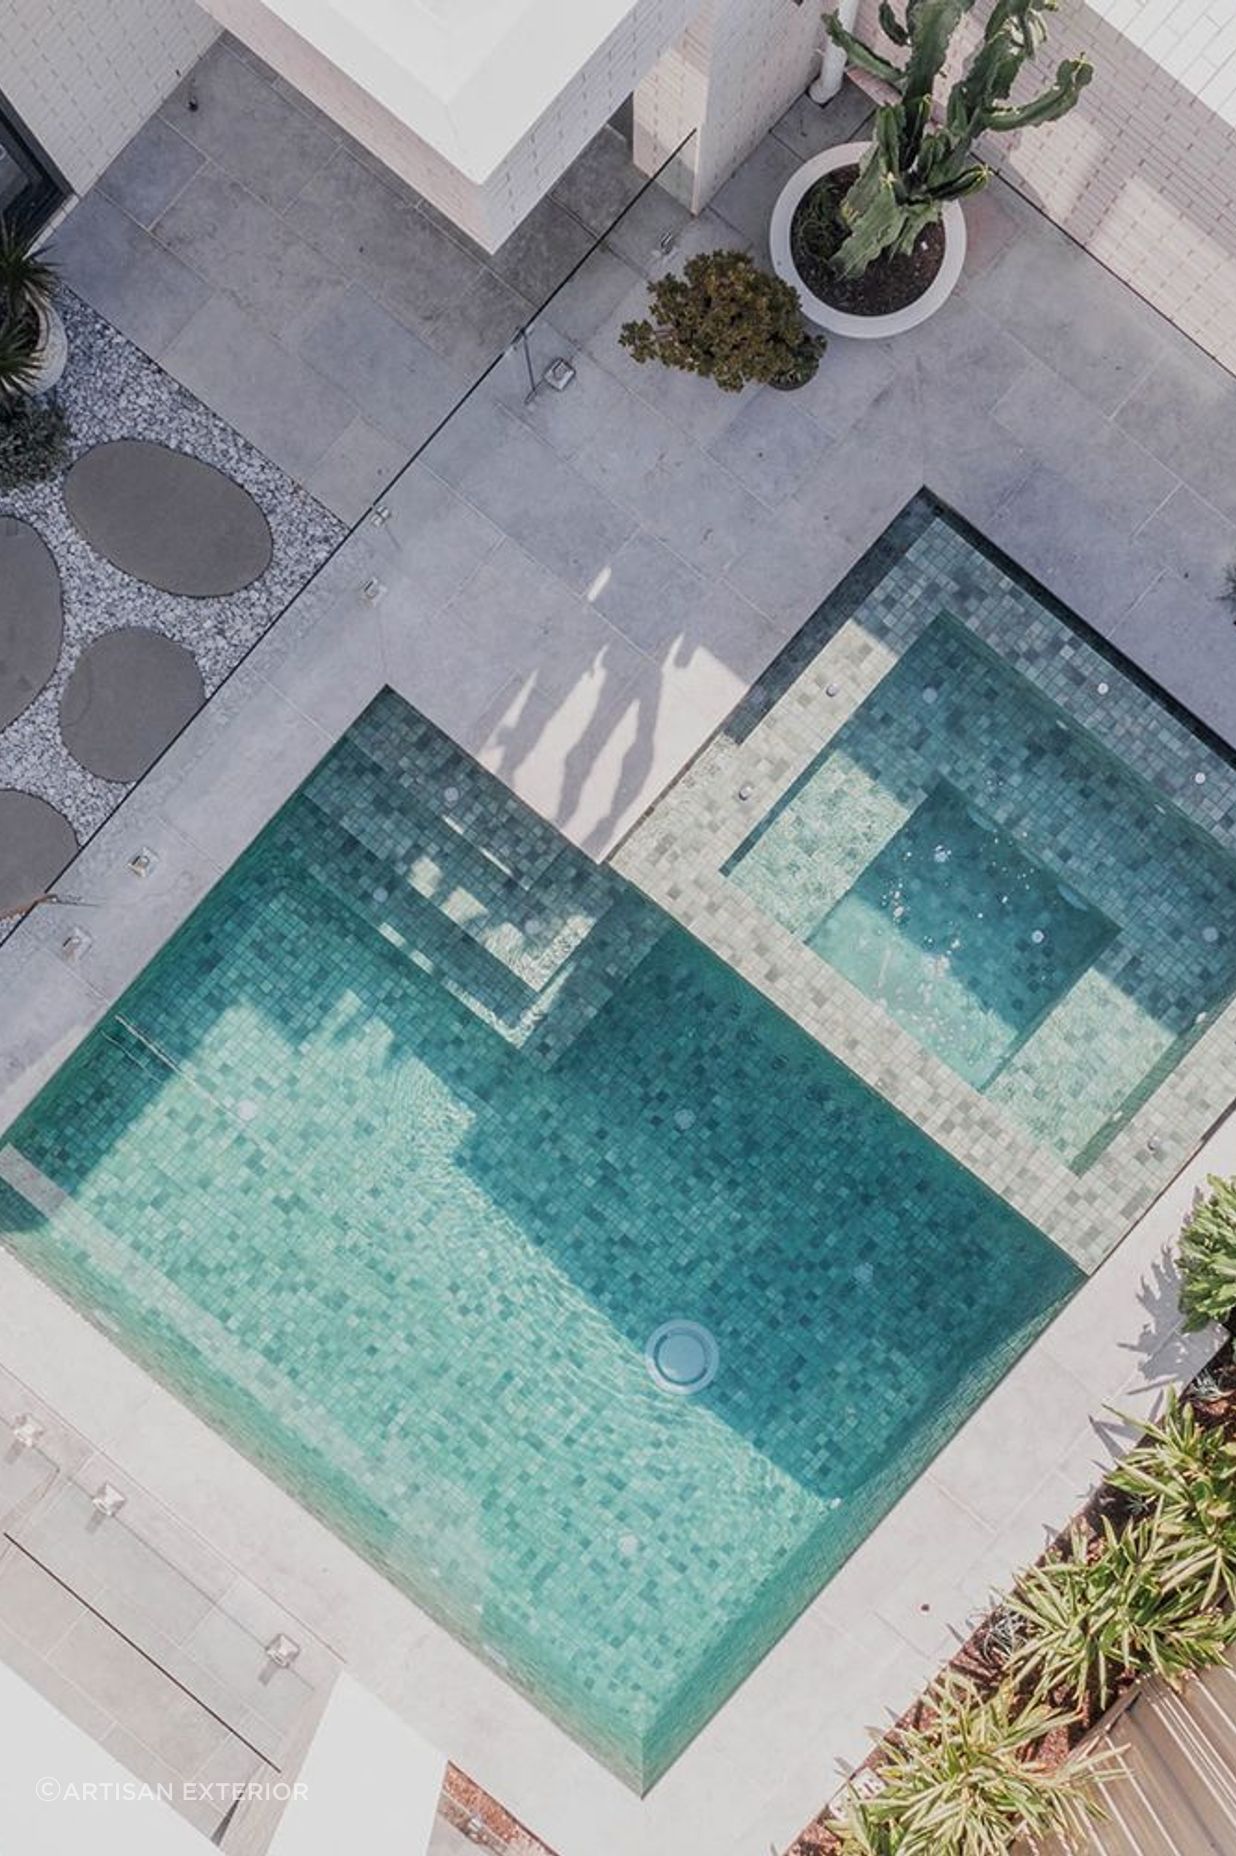 Trace spanish glass pool tiles and mosaics by Artisan Exterior